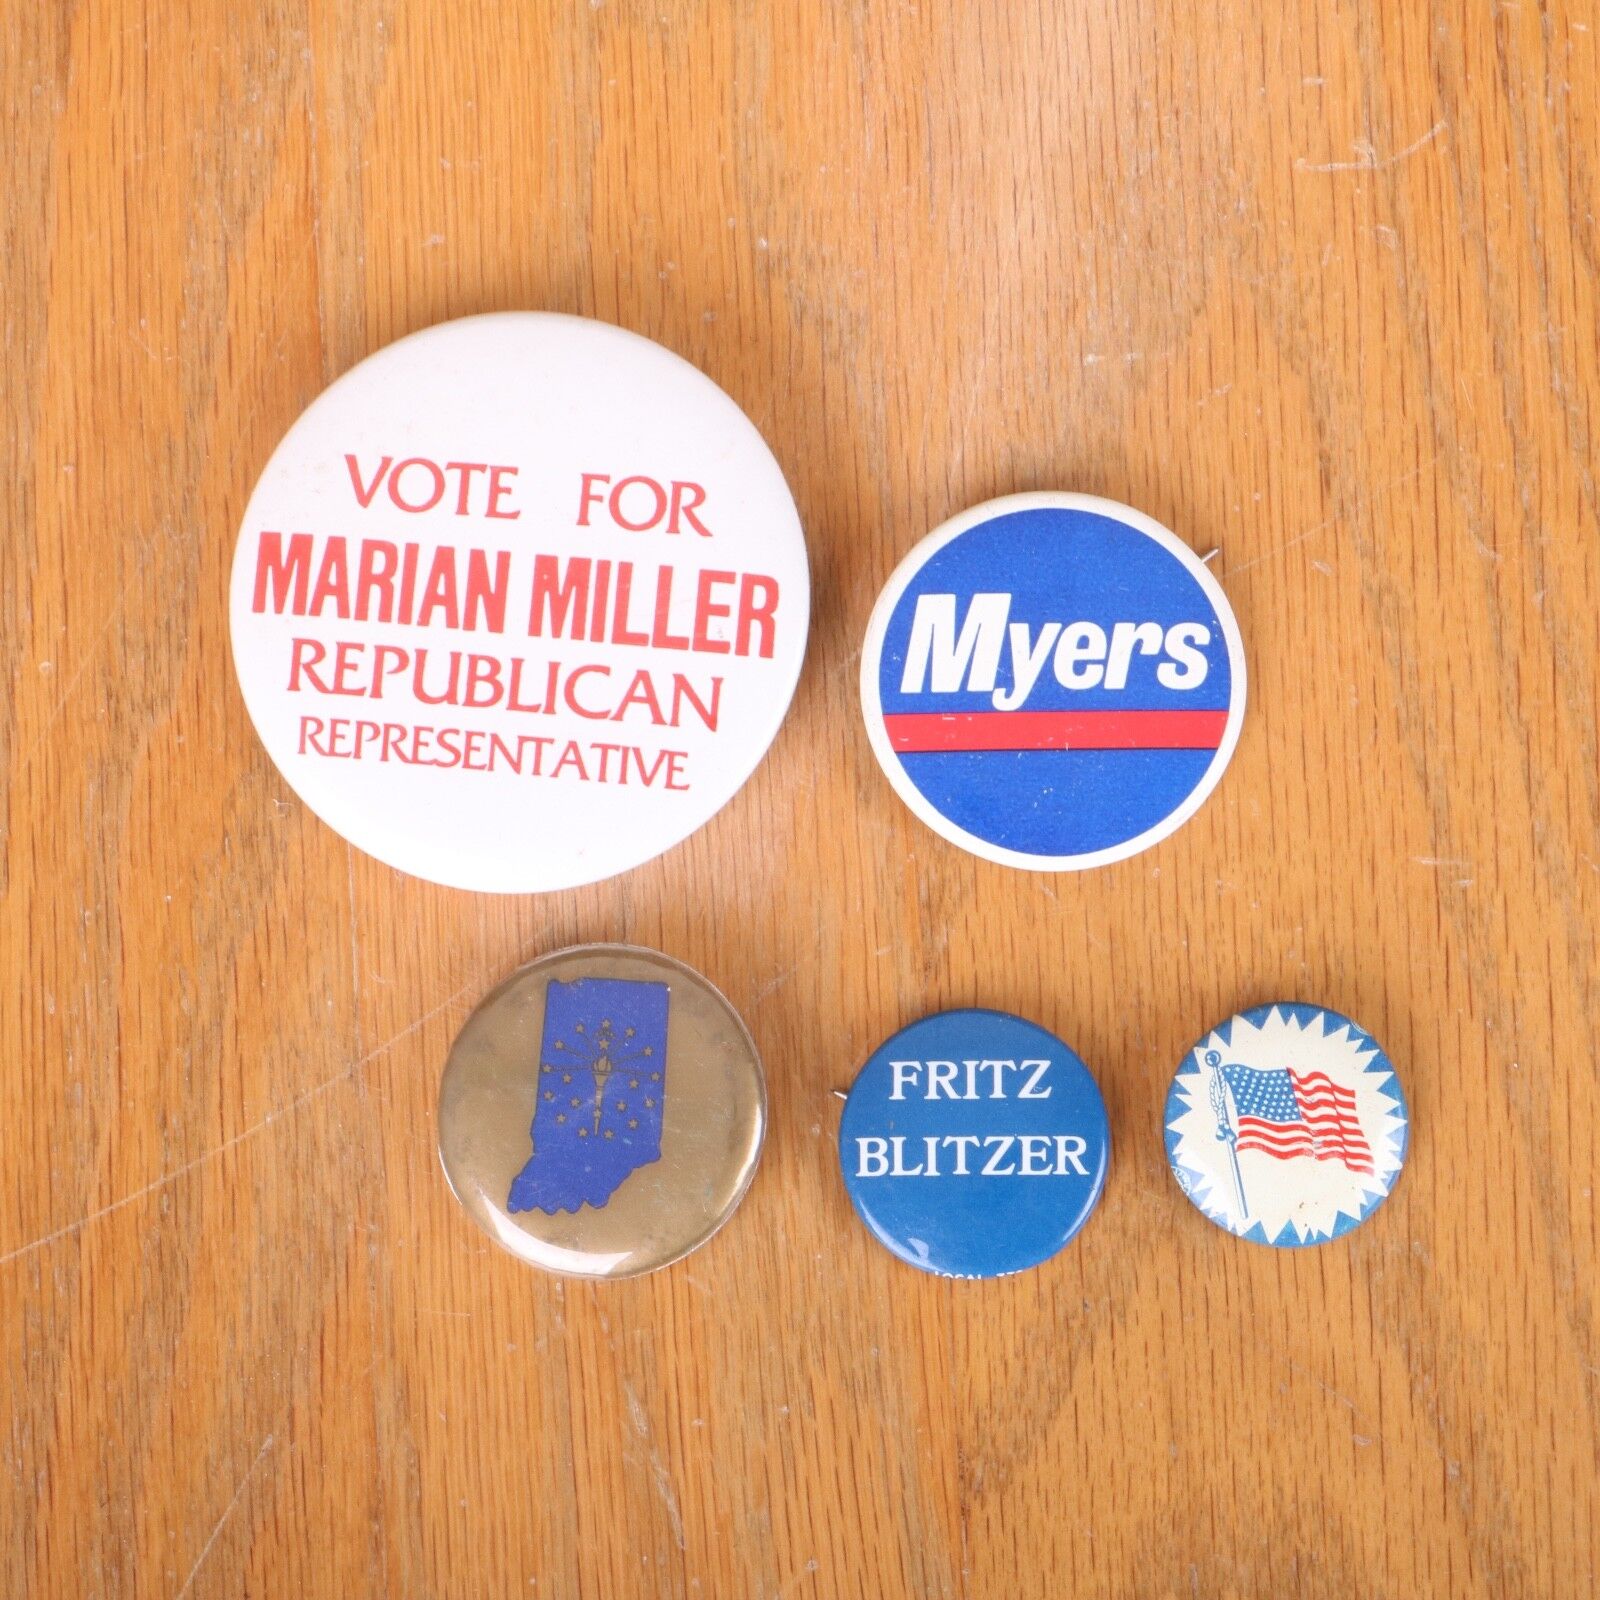 Lot 5 Vintage Political Pins Buttons Pinback Indiana Marian Miller Myers Fritz